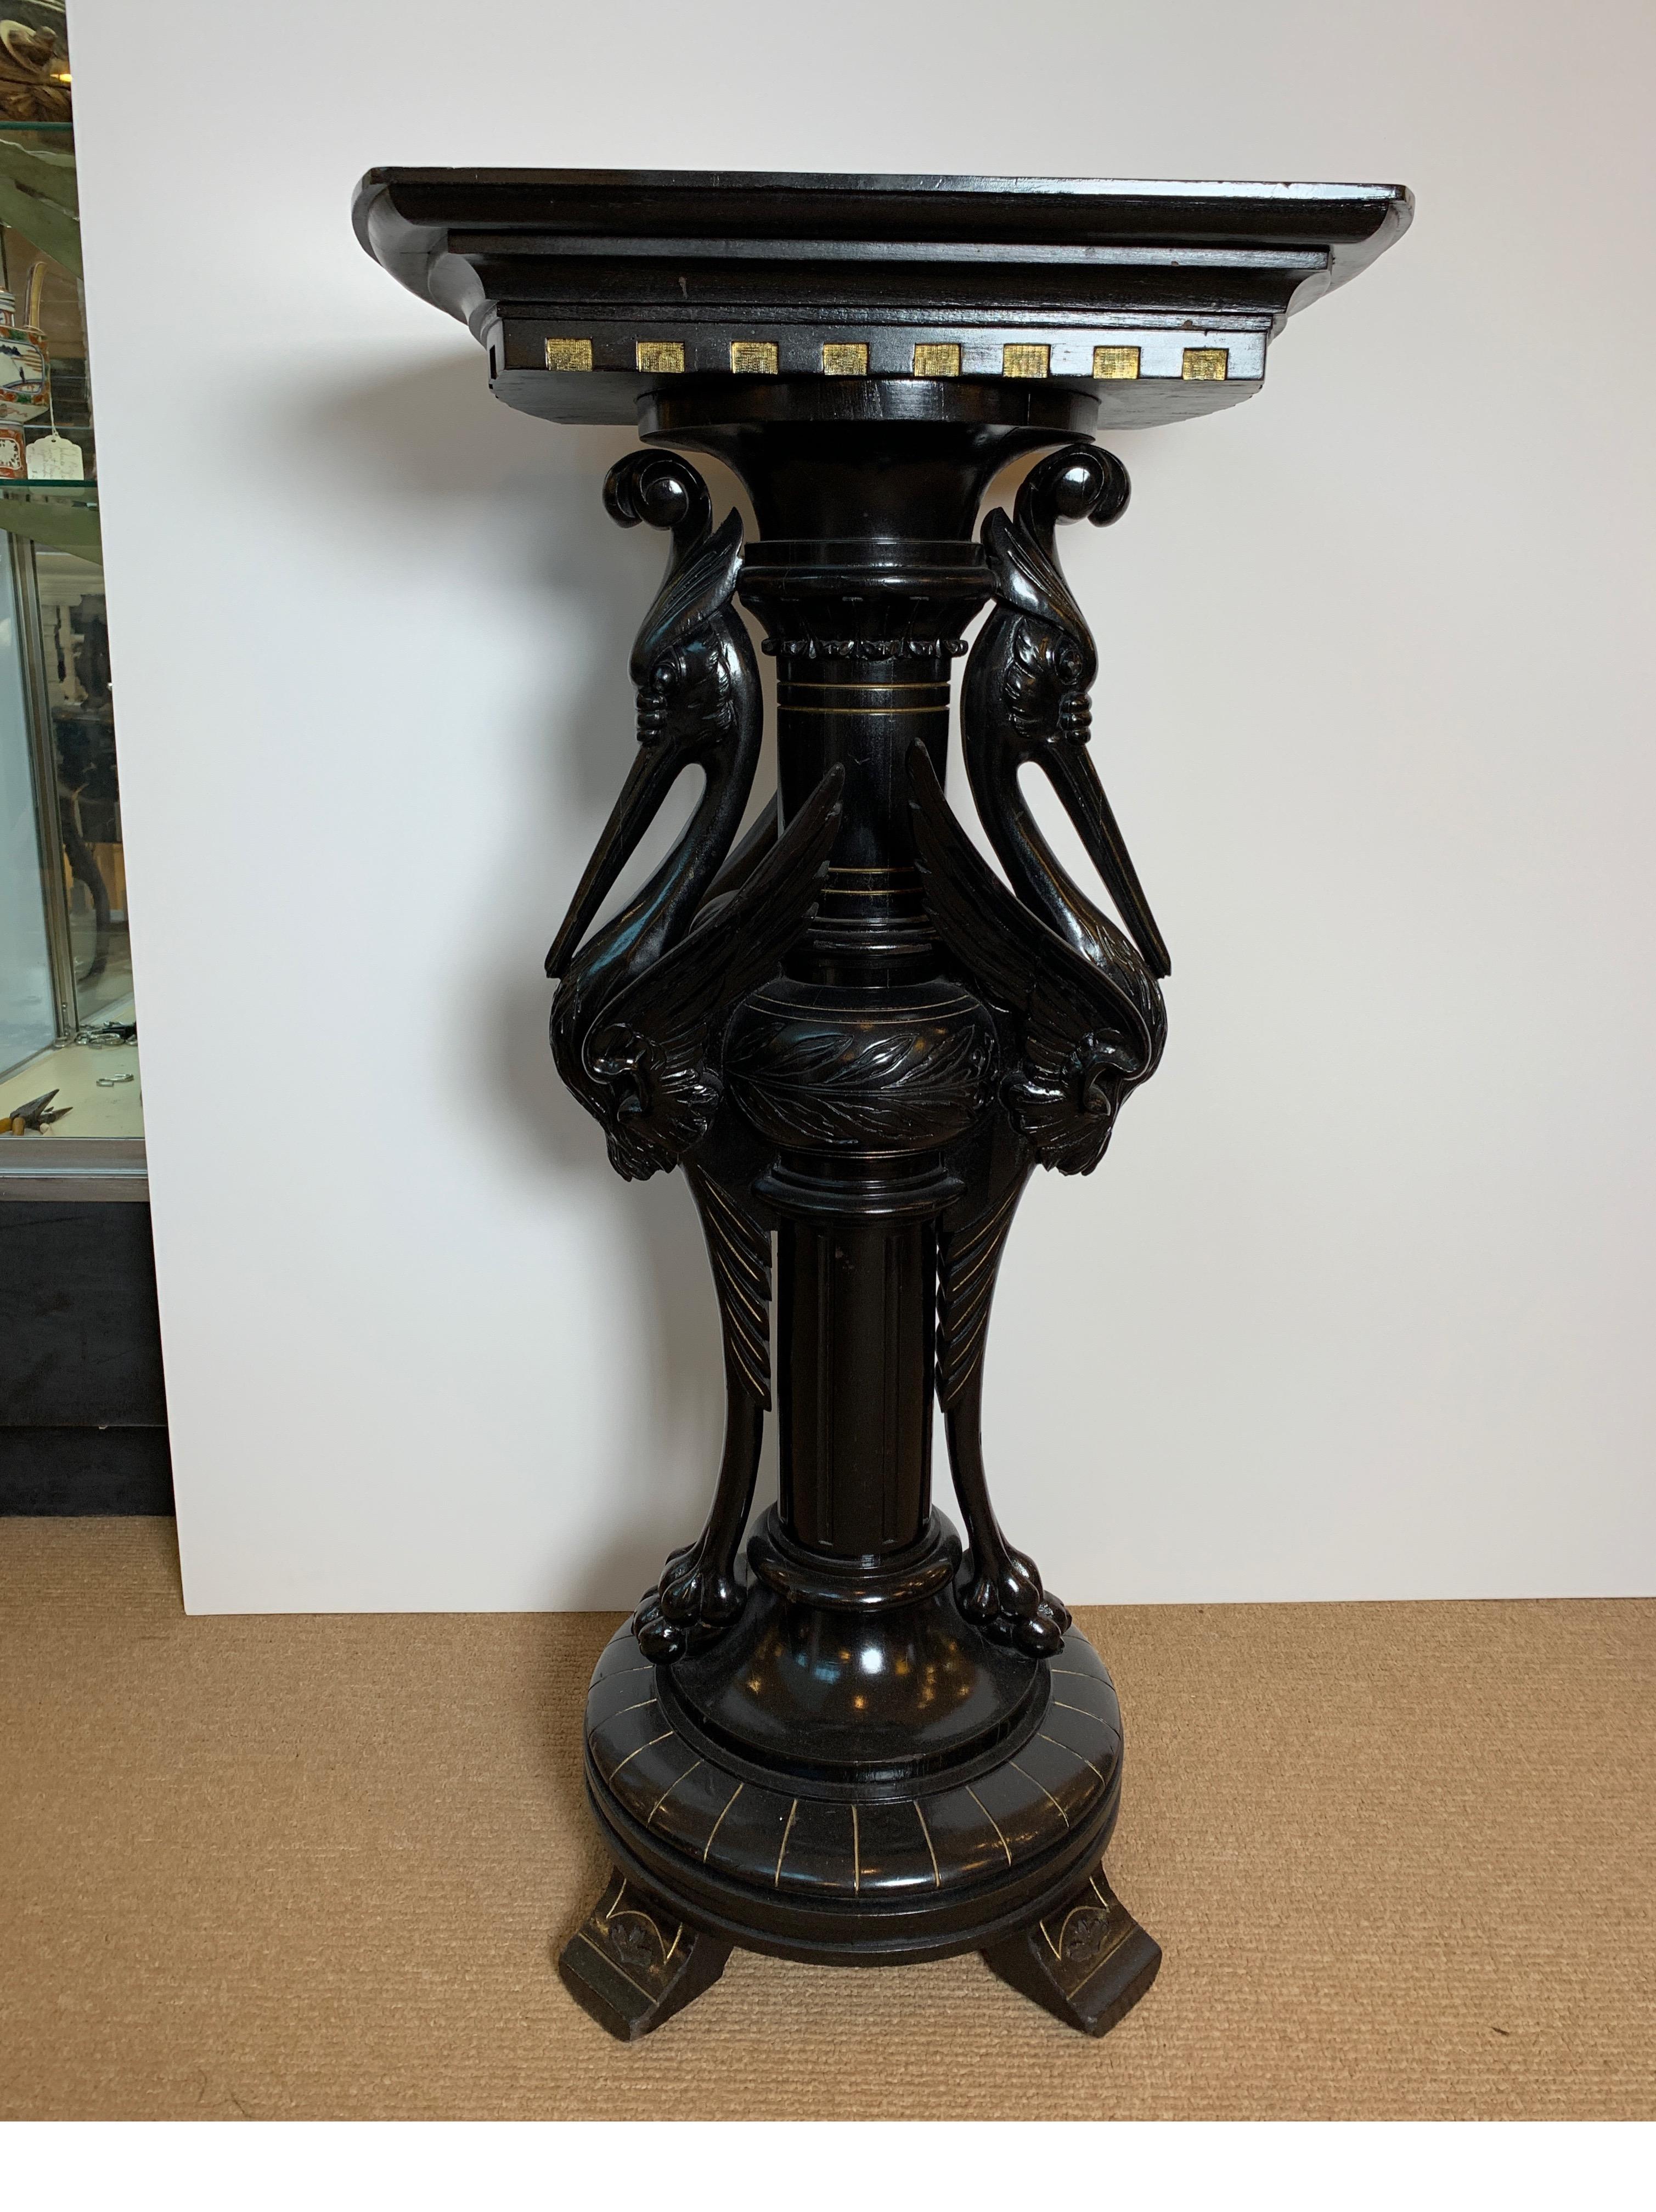 Aesthetic Movement double crane pedestal, ebonized wood with gold accents. Beautifully hand carved and ebonized with the original finish.